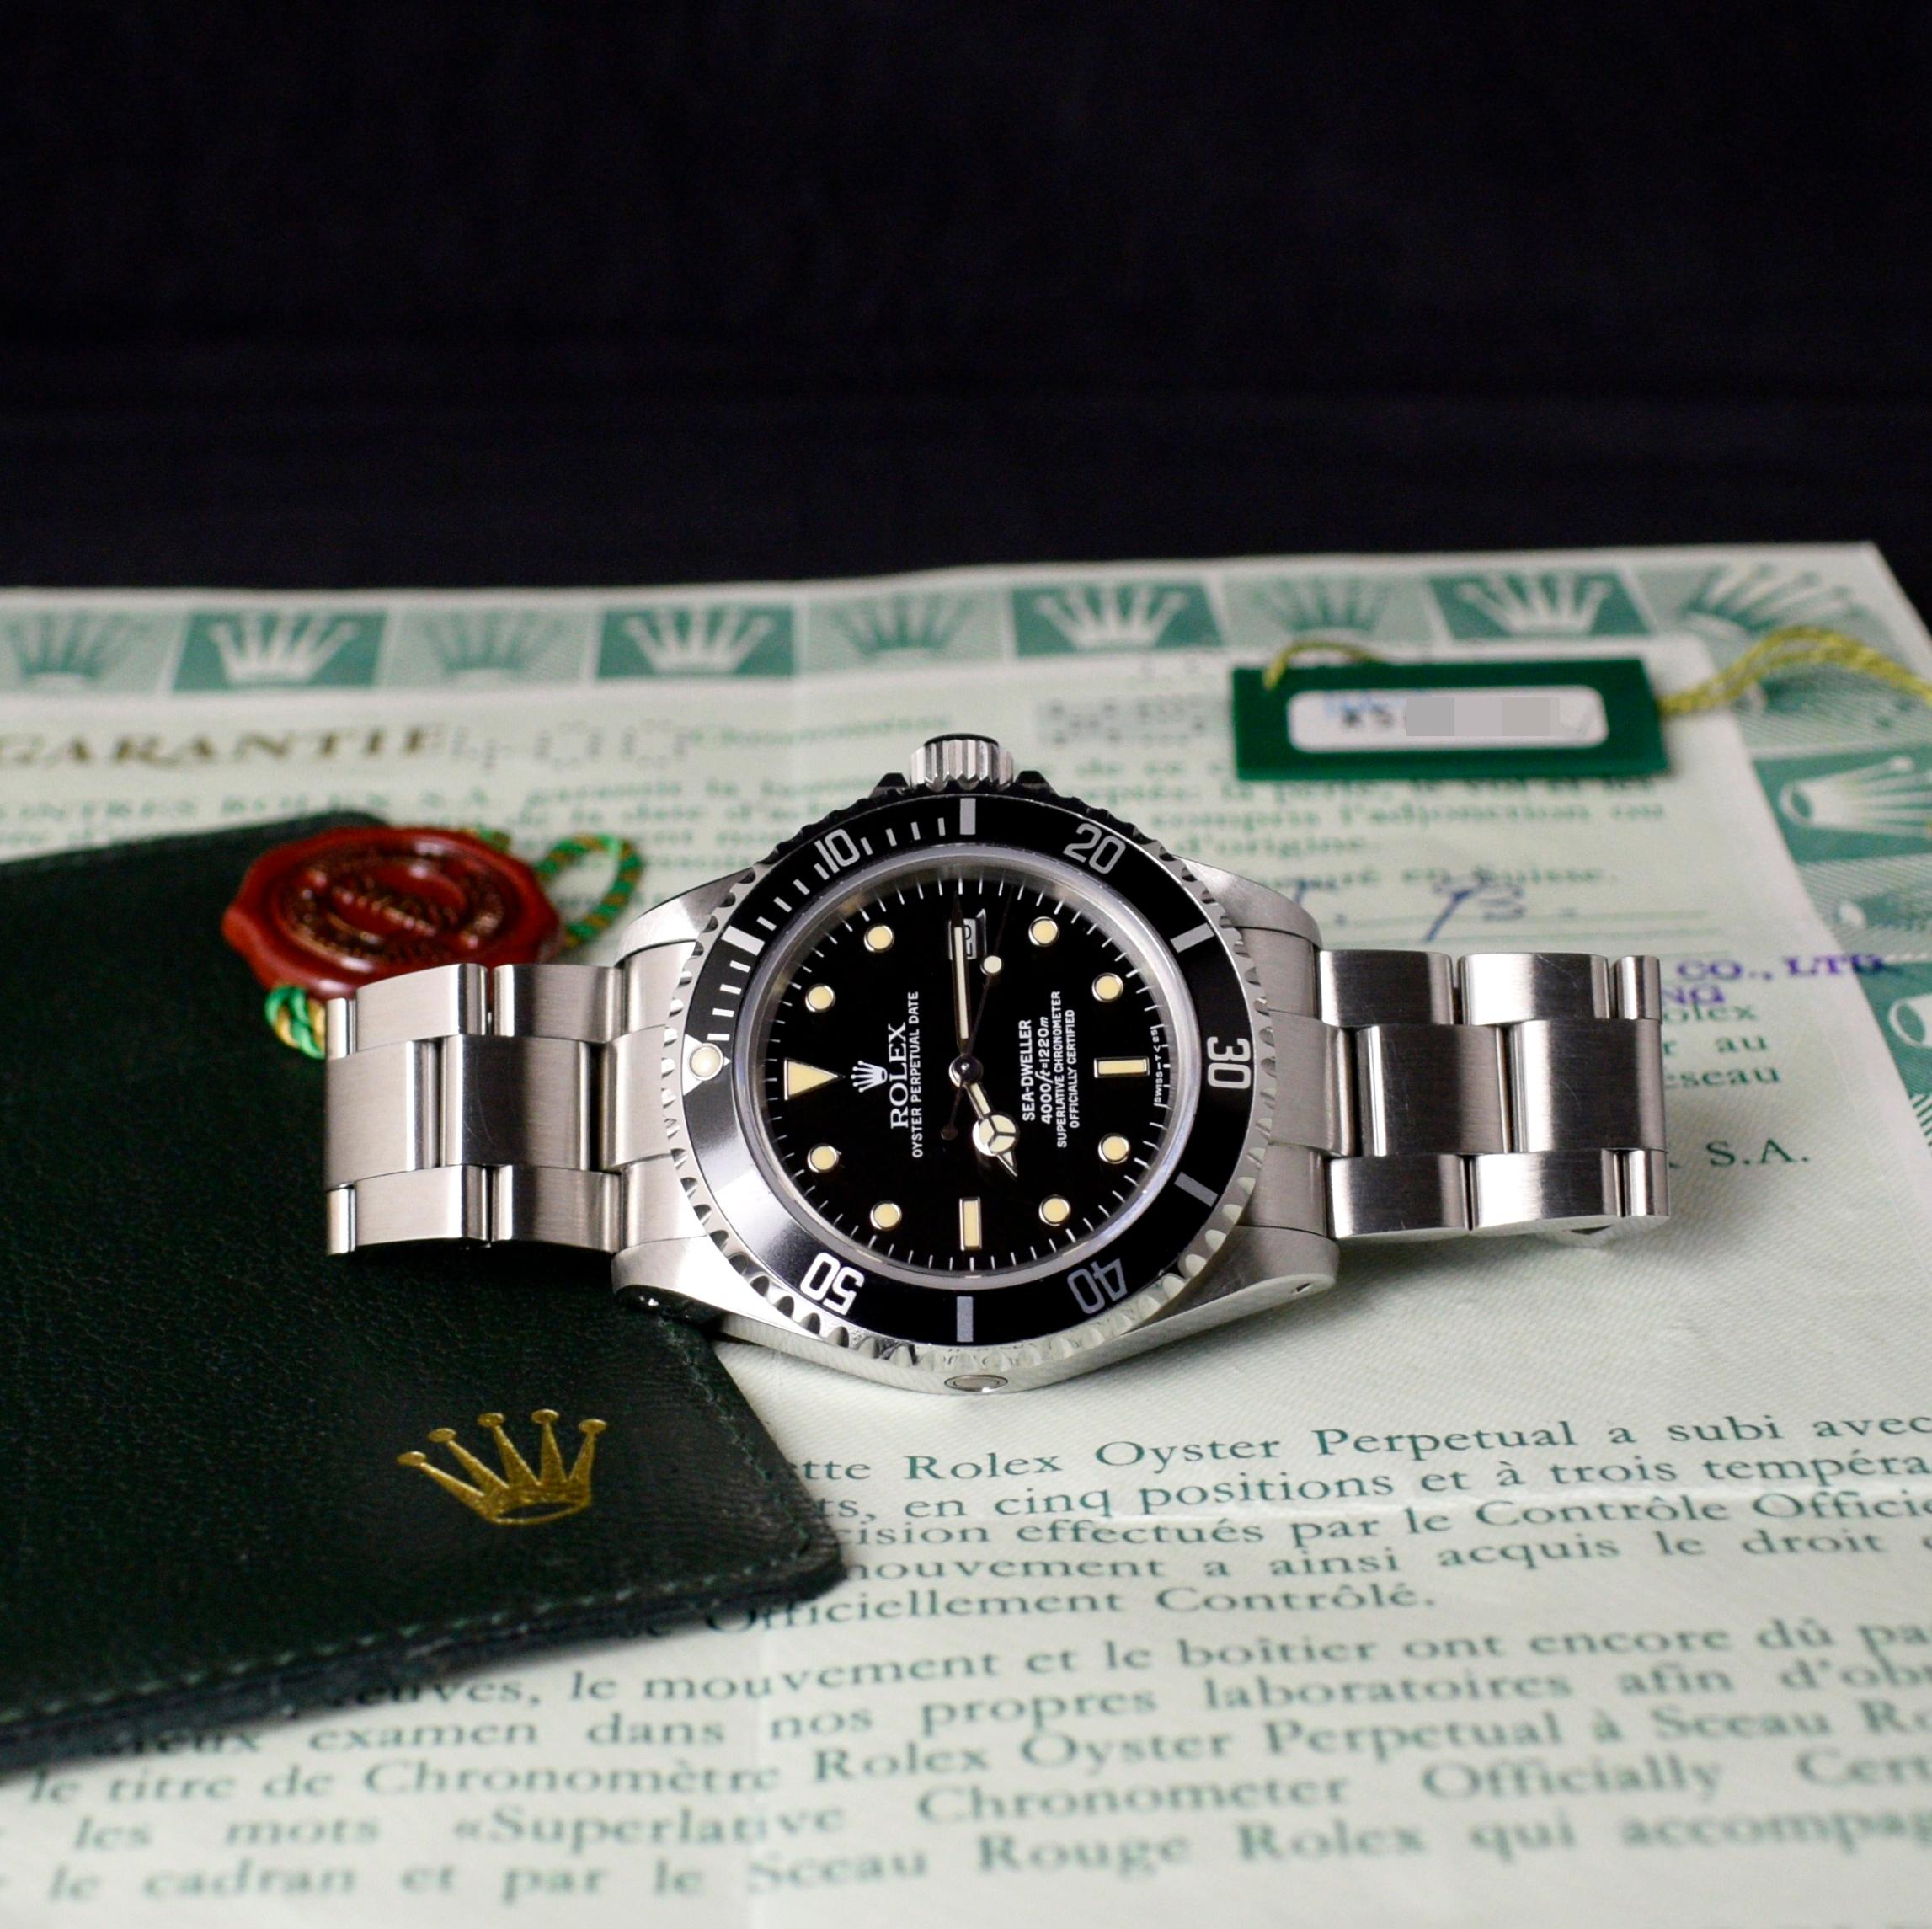 Brand: Rolex
Model: 16600
Year: 1991
Serial number: X5xxxxx
Reference: C03435

Case: Show sign of wear with slight polish from previous; inner case back stamped 16600

Dial: Excellent Aged Condition Black Tritium Dial where the indexes have turned